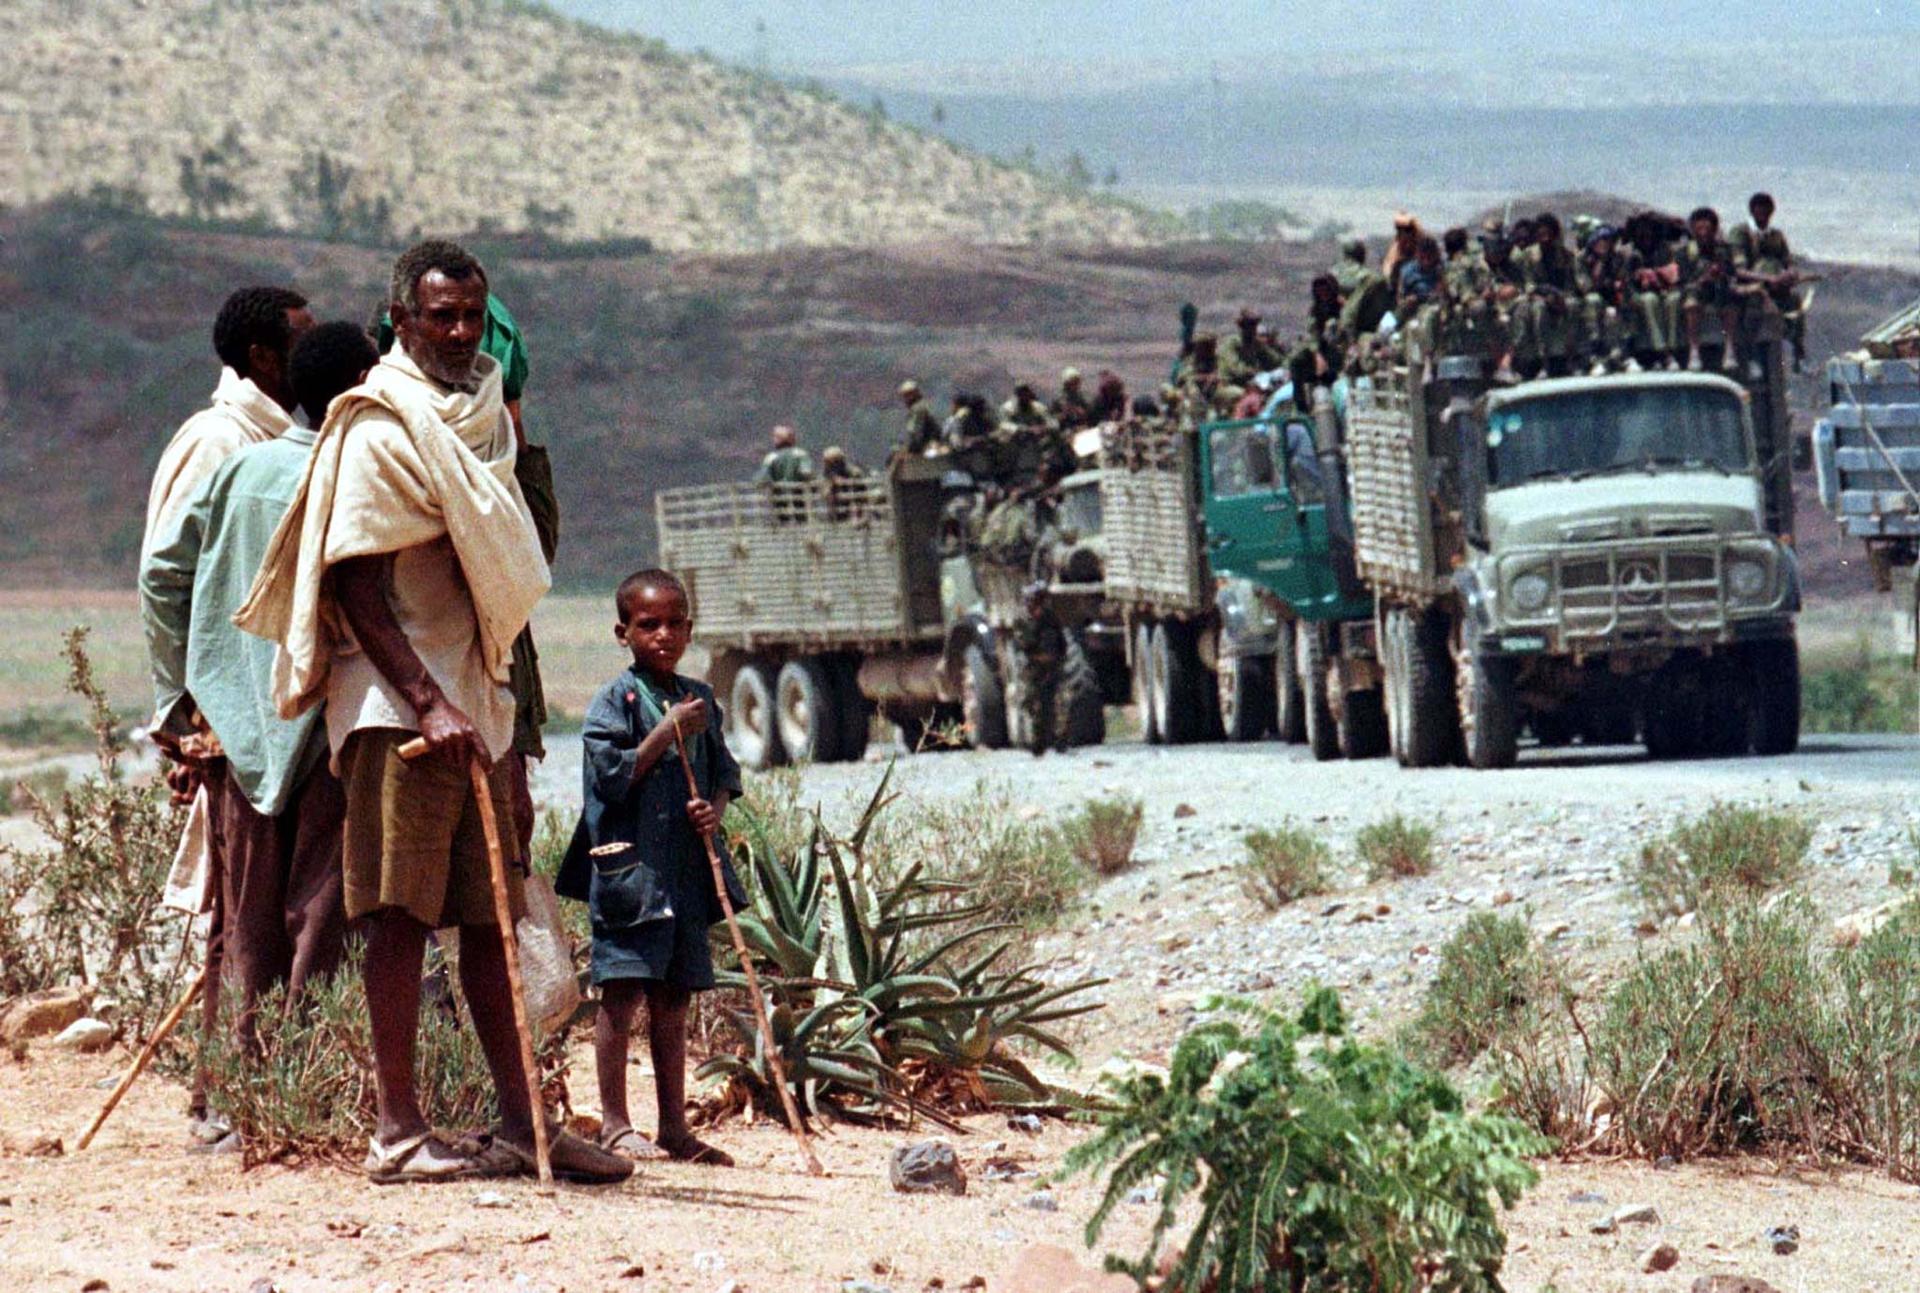 Herdsmen watch a convoy carrying Ethiopian soldiers pass on its way to the frontline at Zalambessa, as Ethiopian and Eritrean forces clashed near the disputed town of Badme, June 11, 1998.